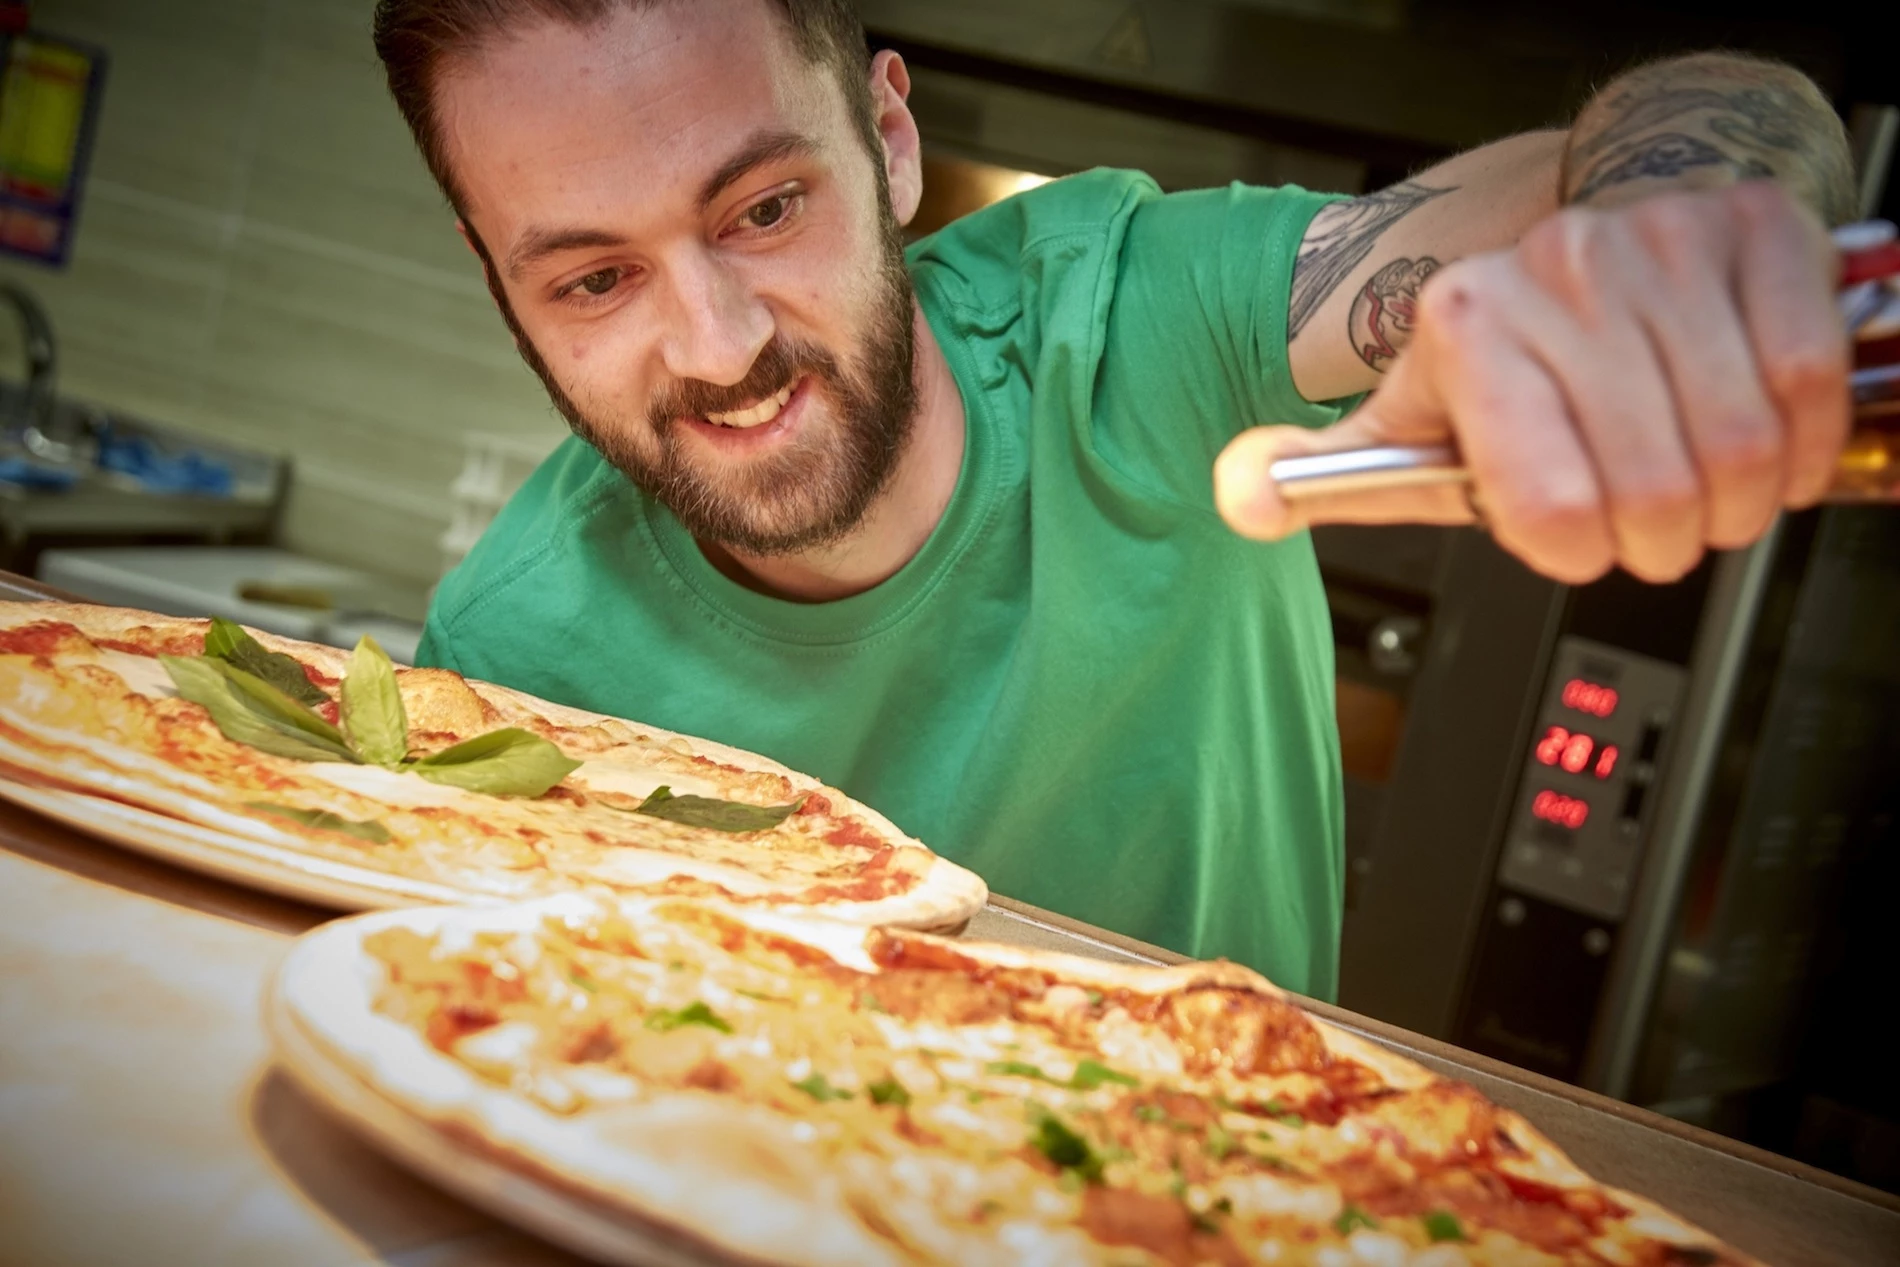 Head Chef Tom Lynch prepares meals for Buca di Pizza diners.